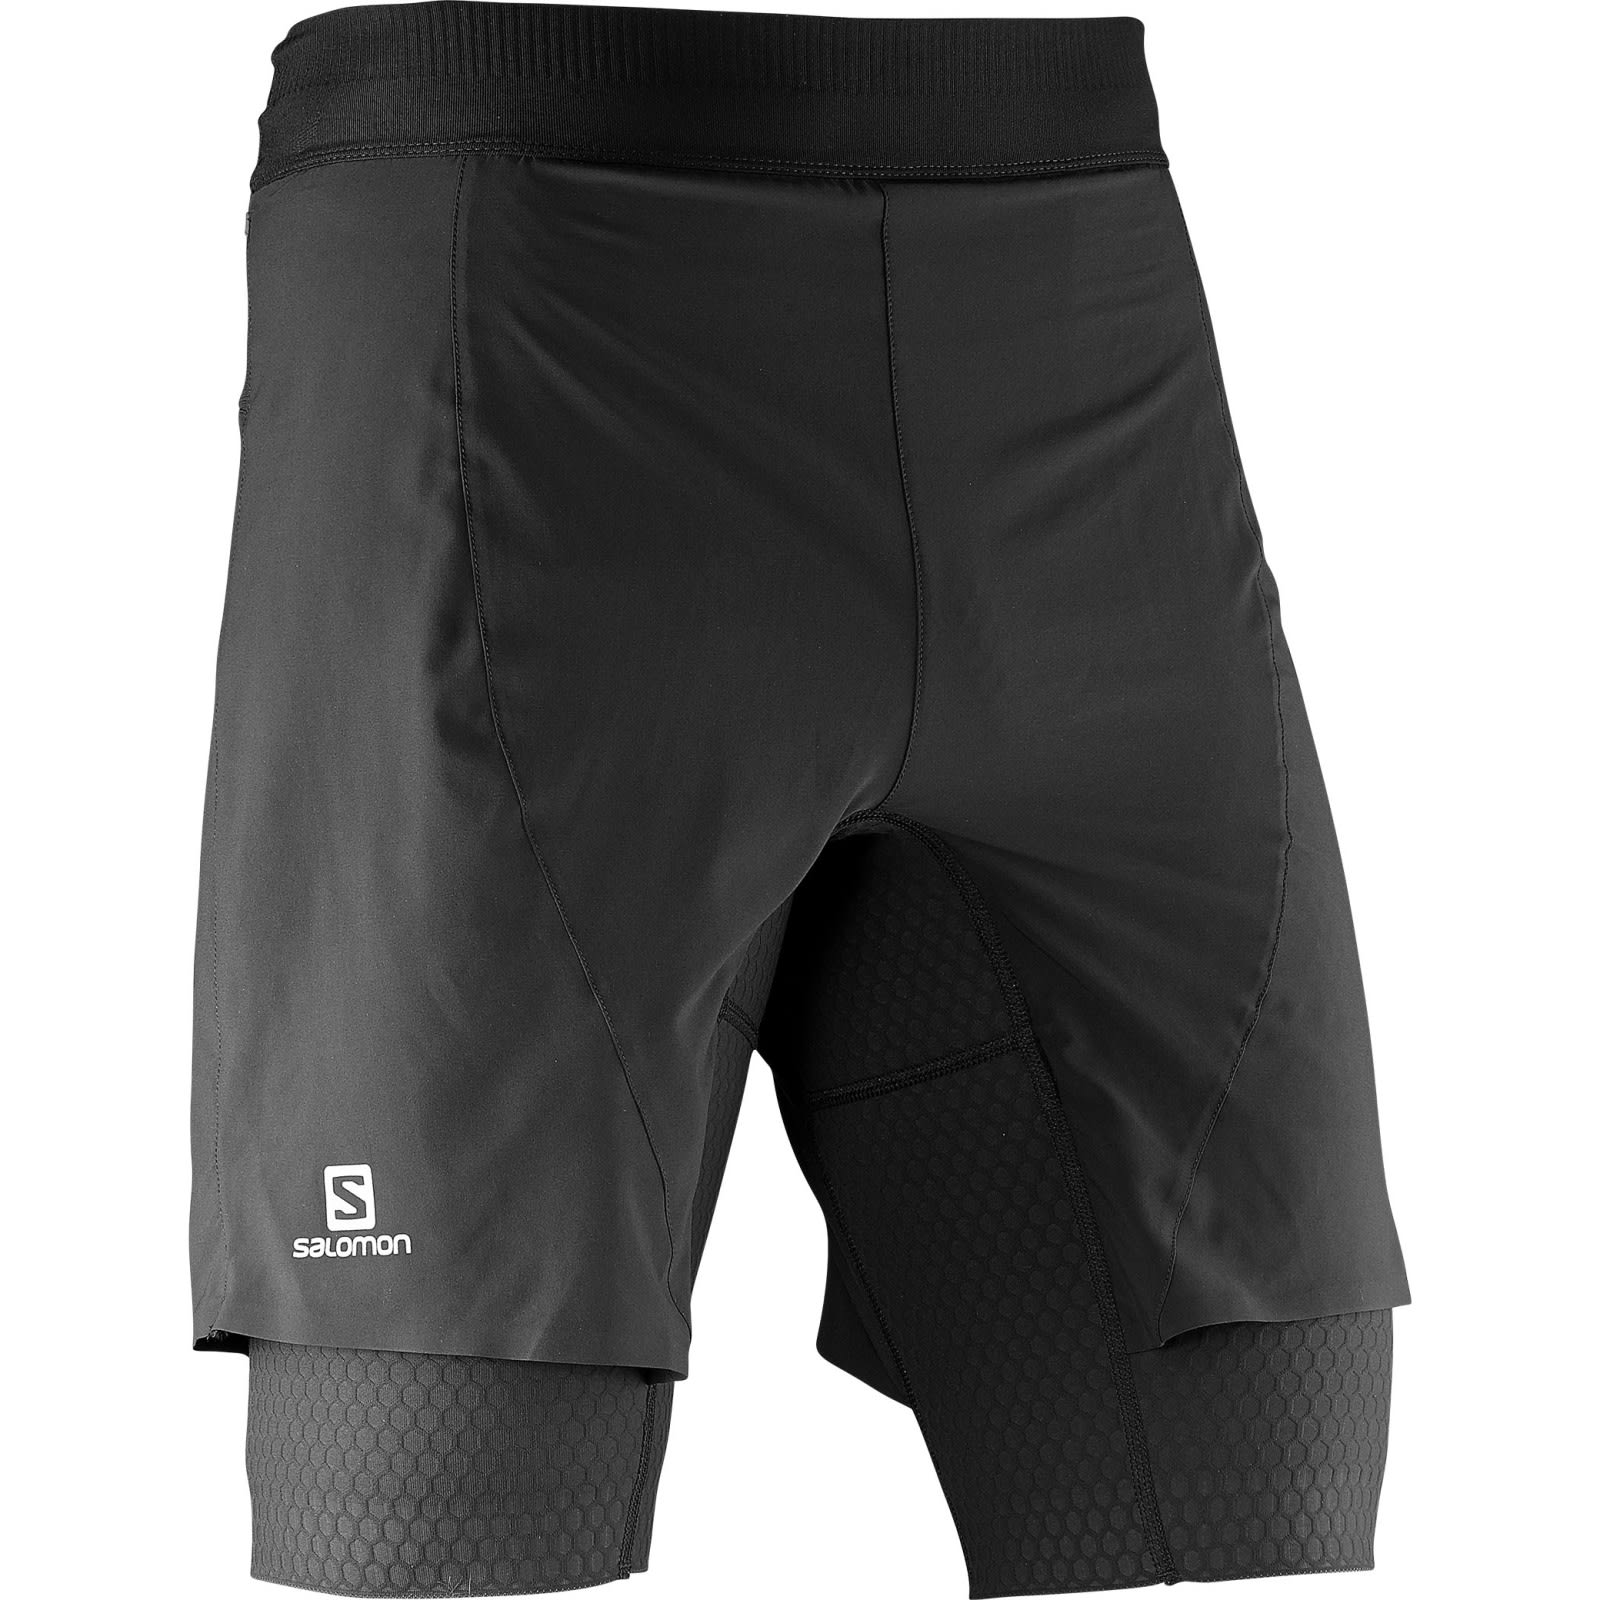 Buy Salomon Exo Pro Twinskin Short M from Outnorth